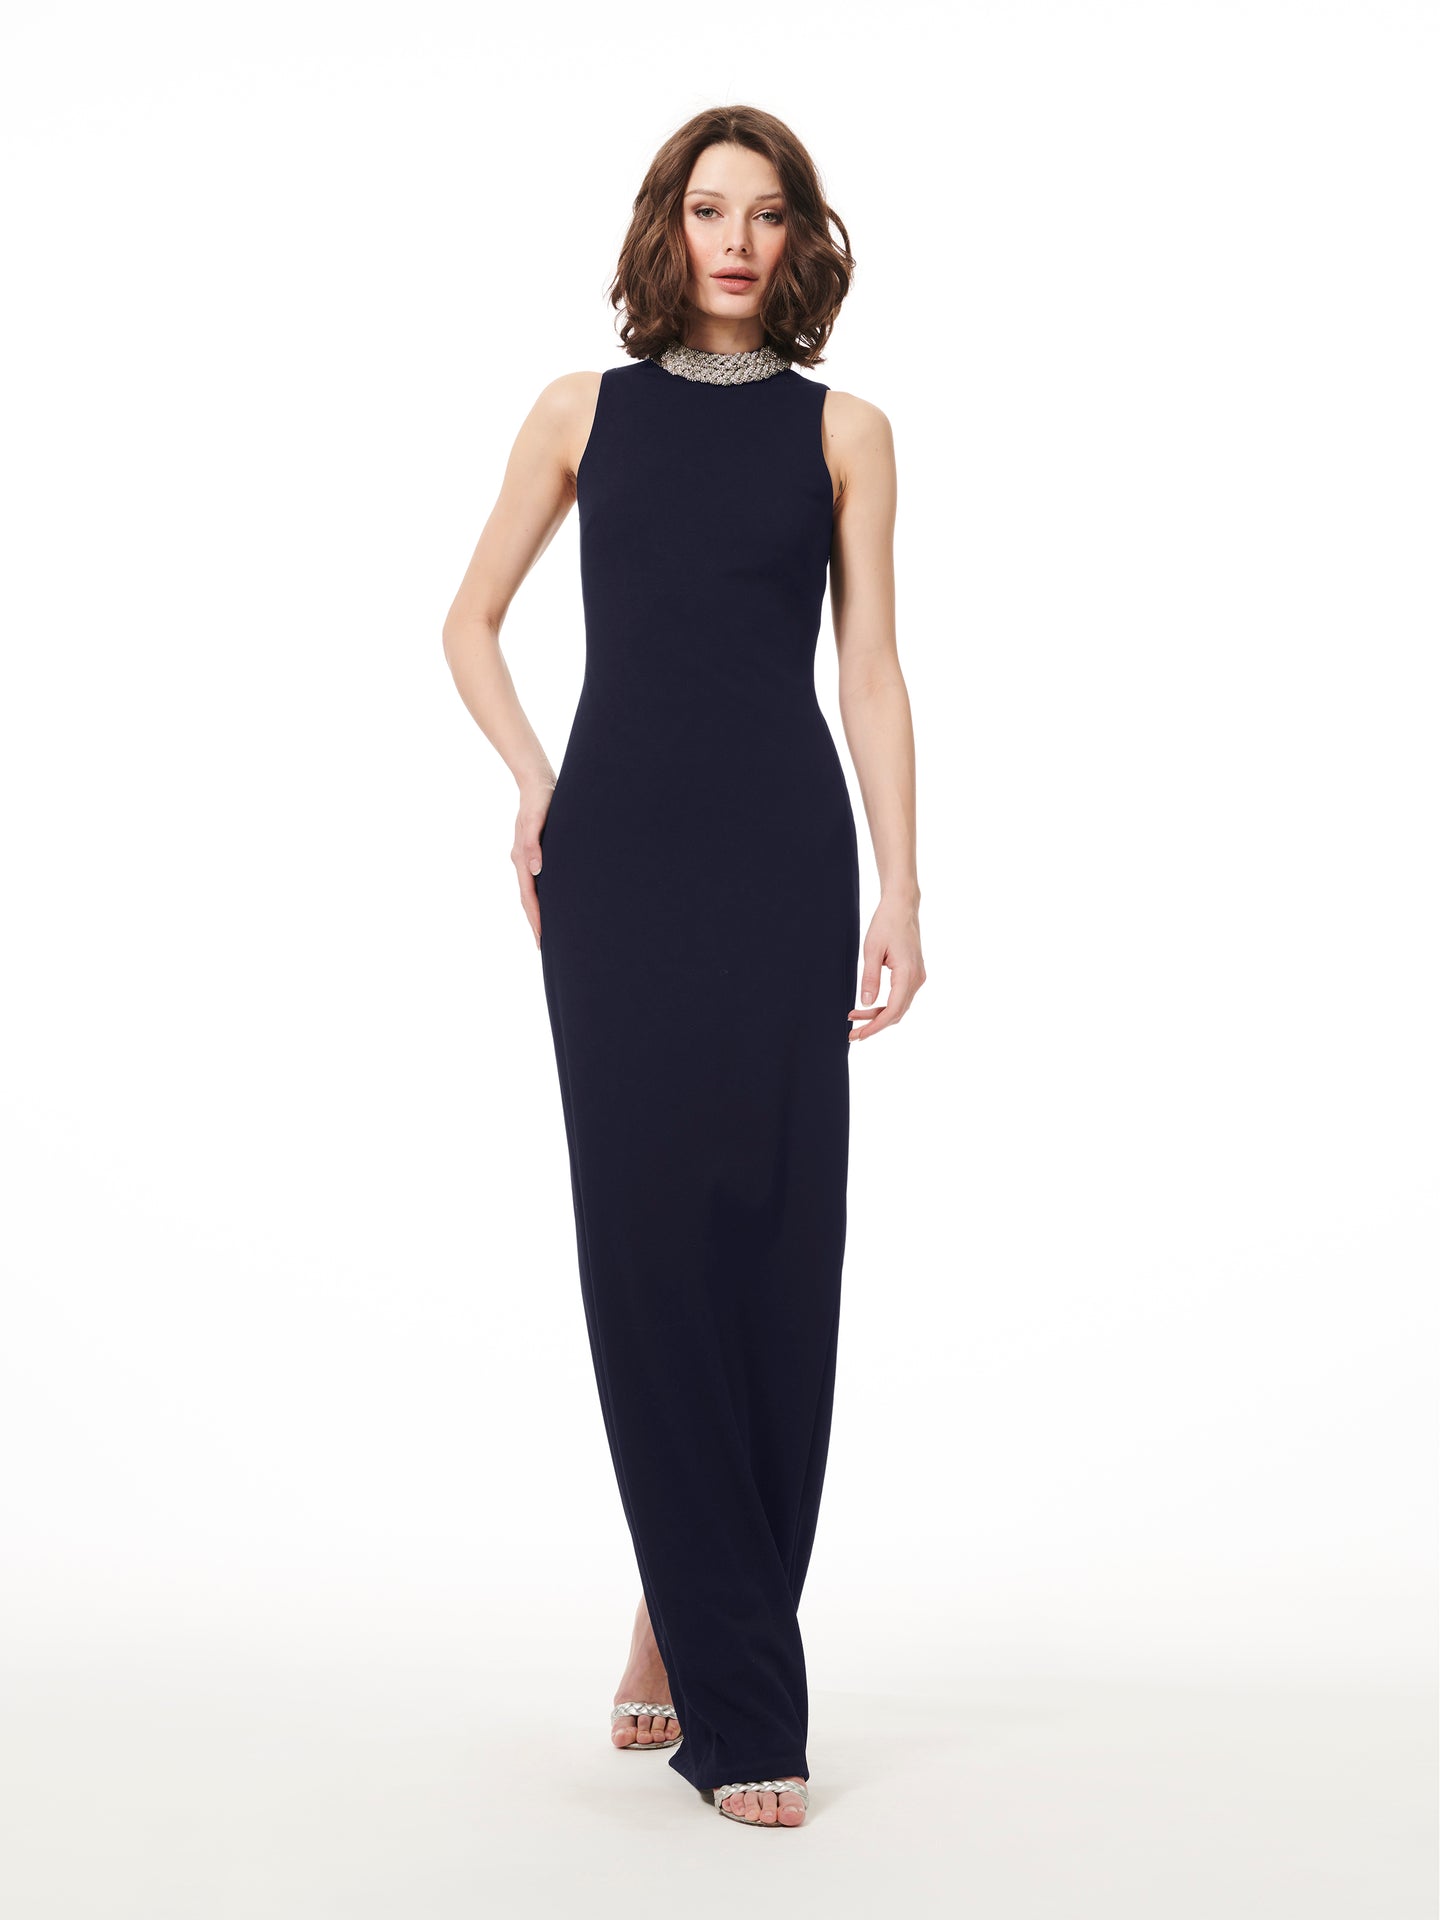 BRAIDED NECK STRETCH CREPE GOWN